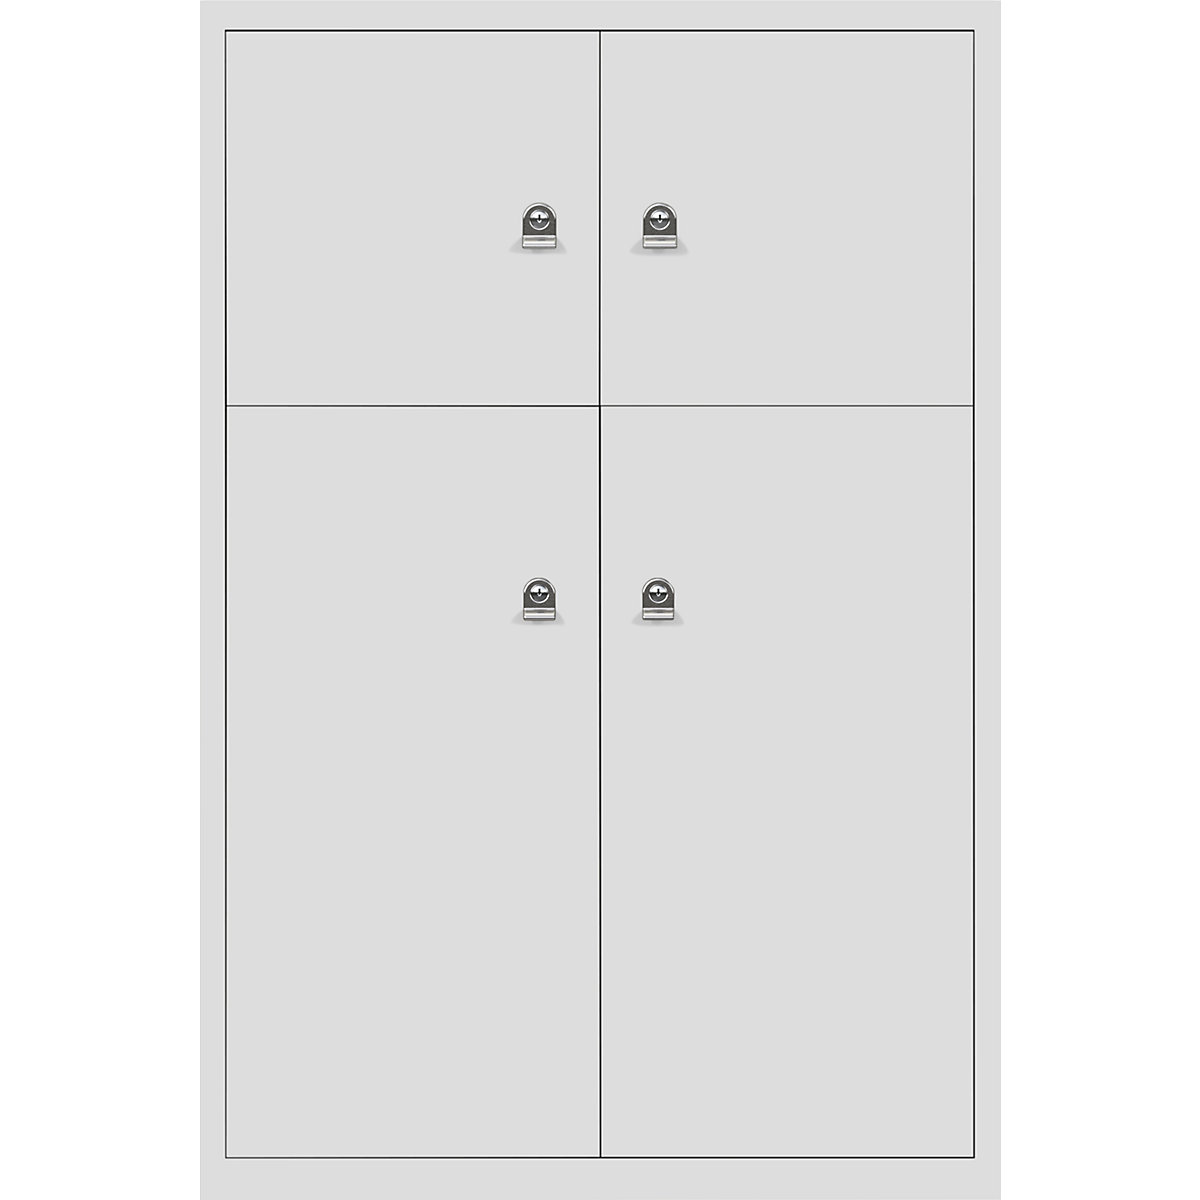 BISLEY – LateralFile™ lodge, with 4 lockable compartments, height 2 x 375 mm, 2 x 755 mm, light grey